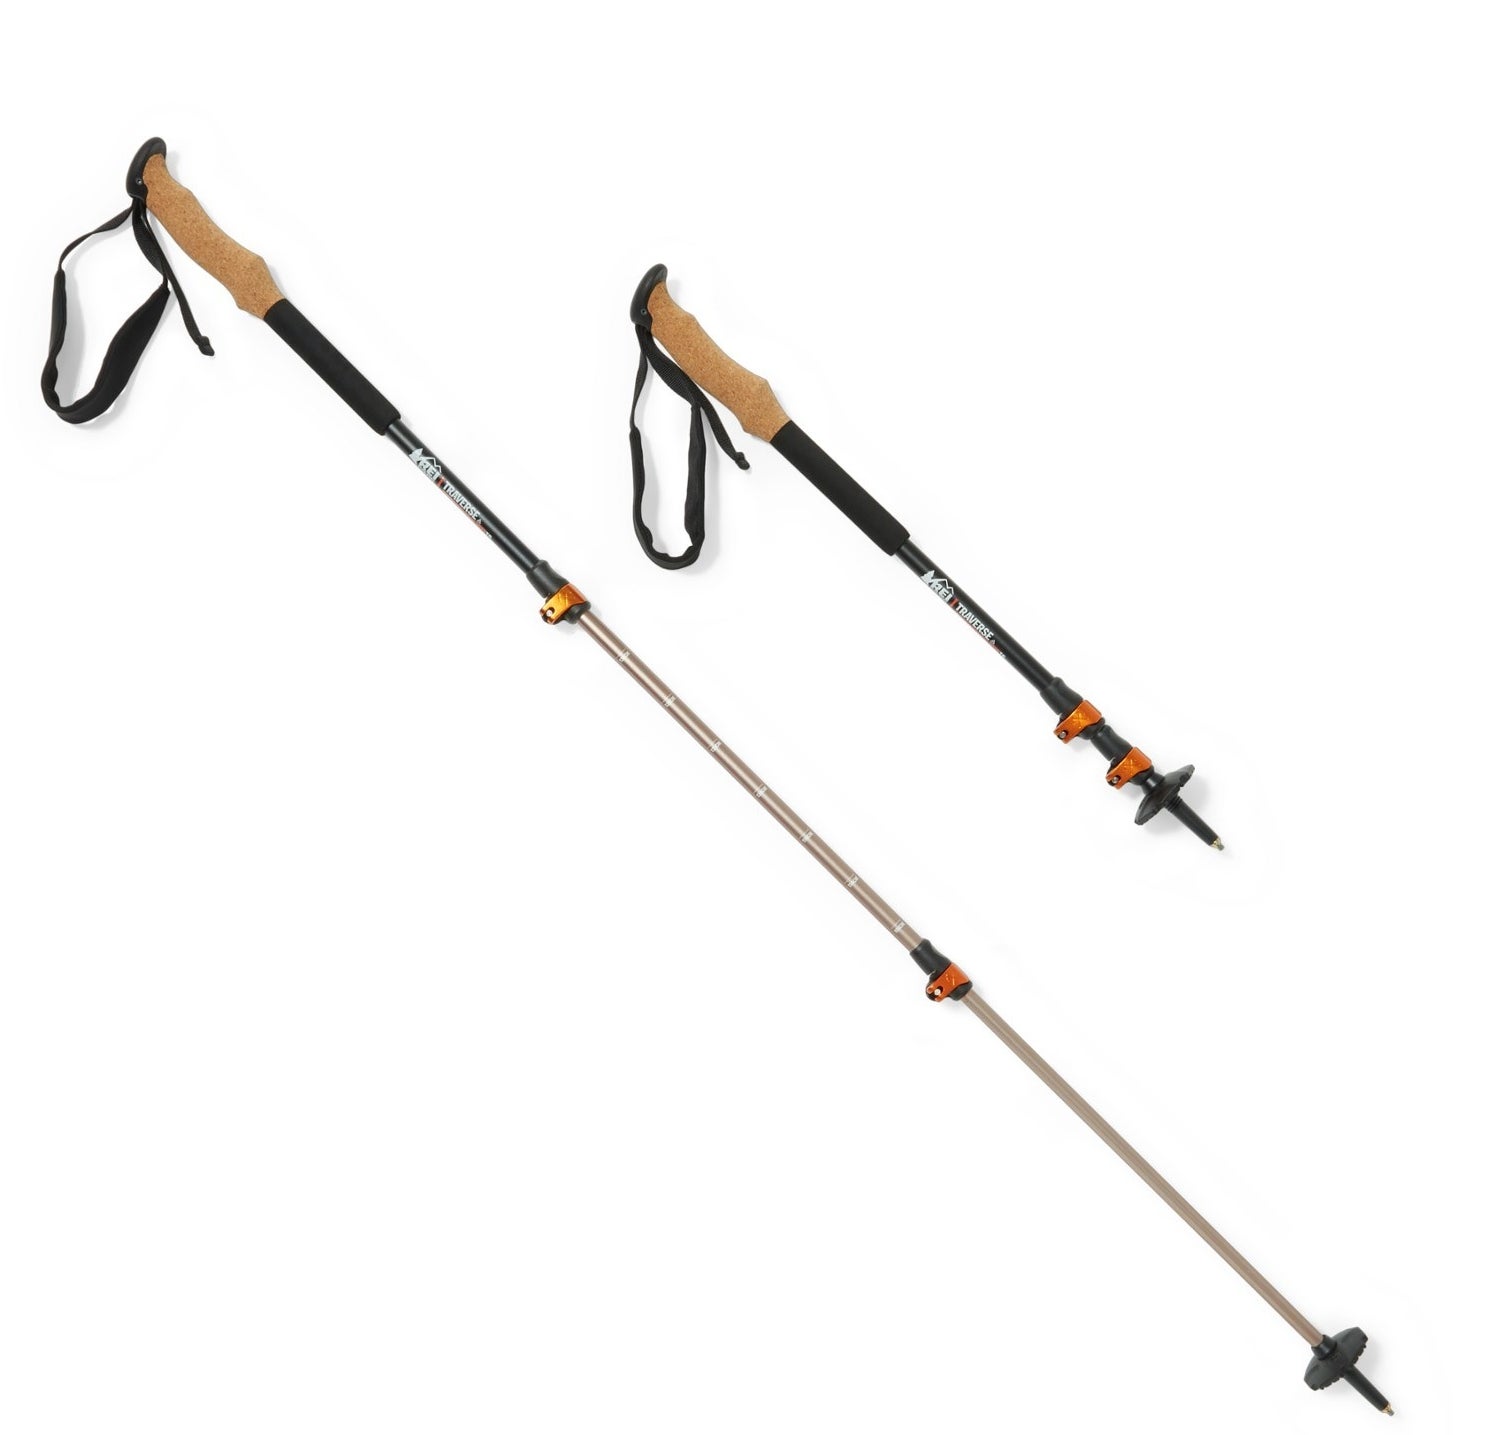 collapsible trekking poles with cork handles